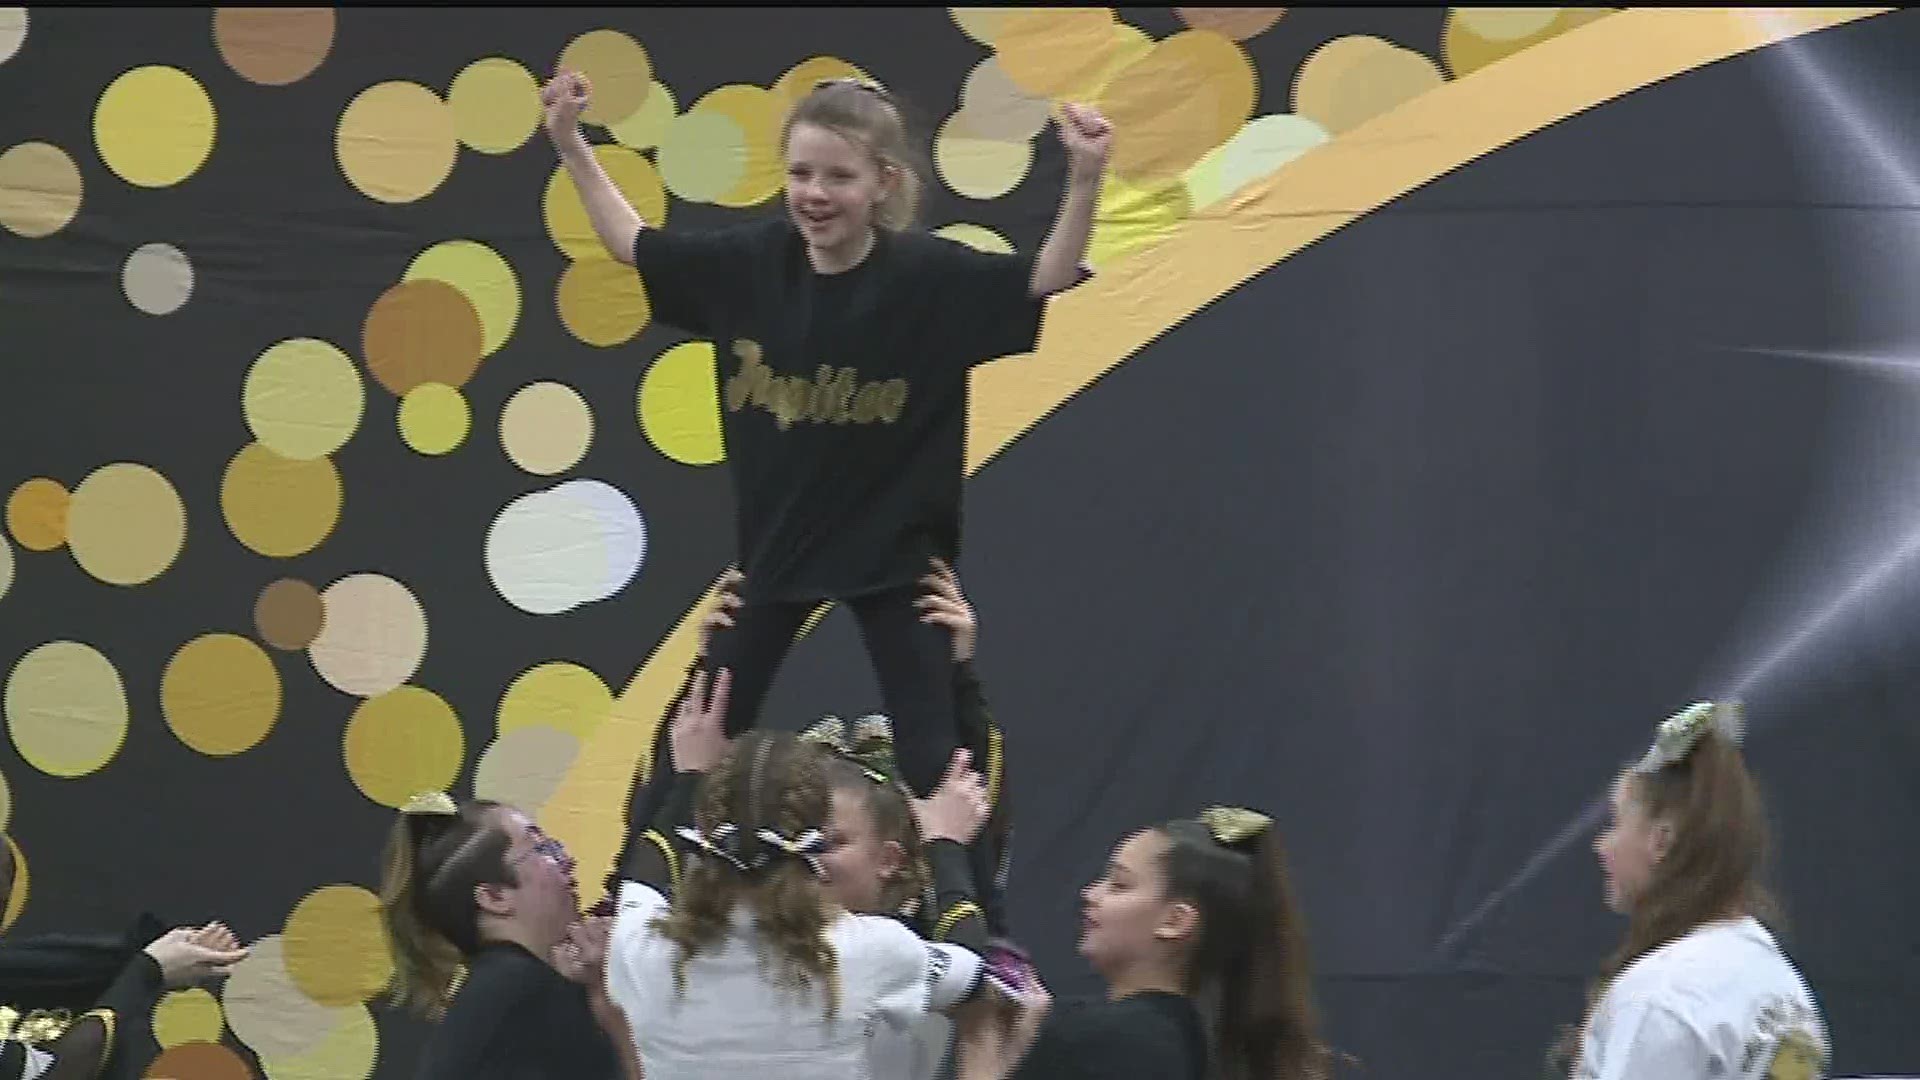 A Lancaster County special needs cheerleading team is changing the way people with differences are accepted